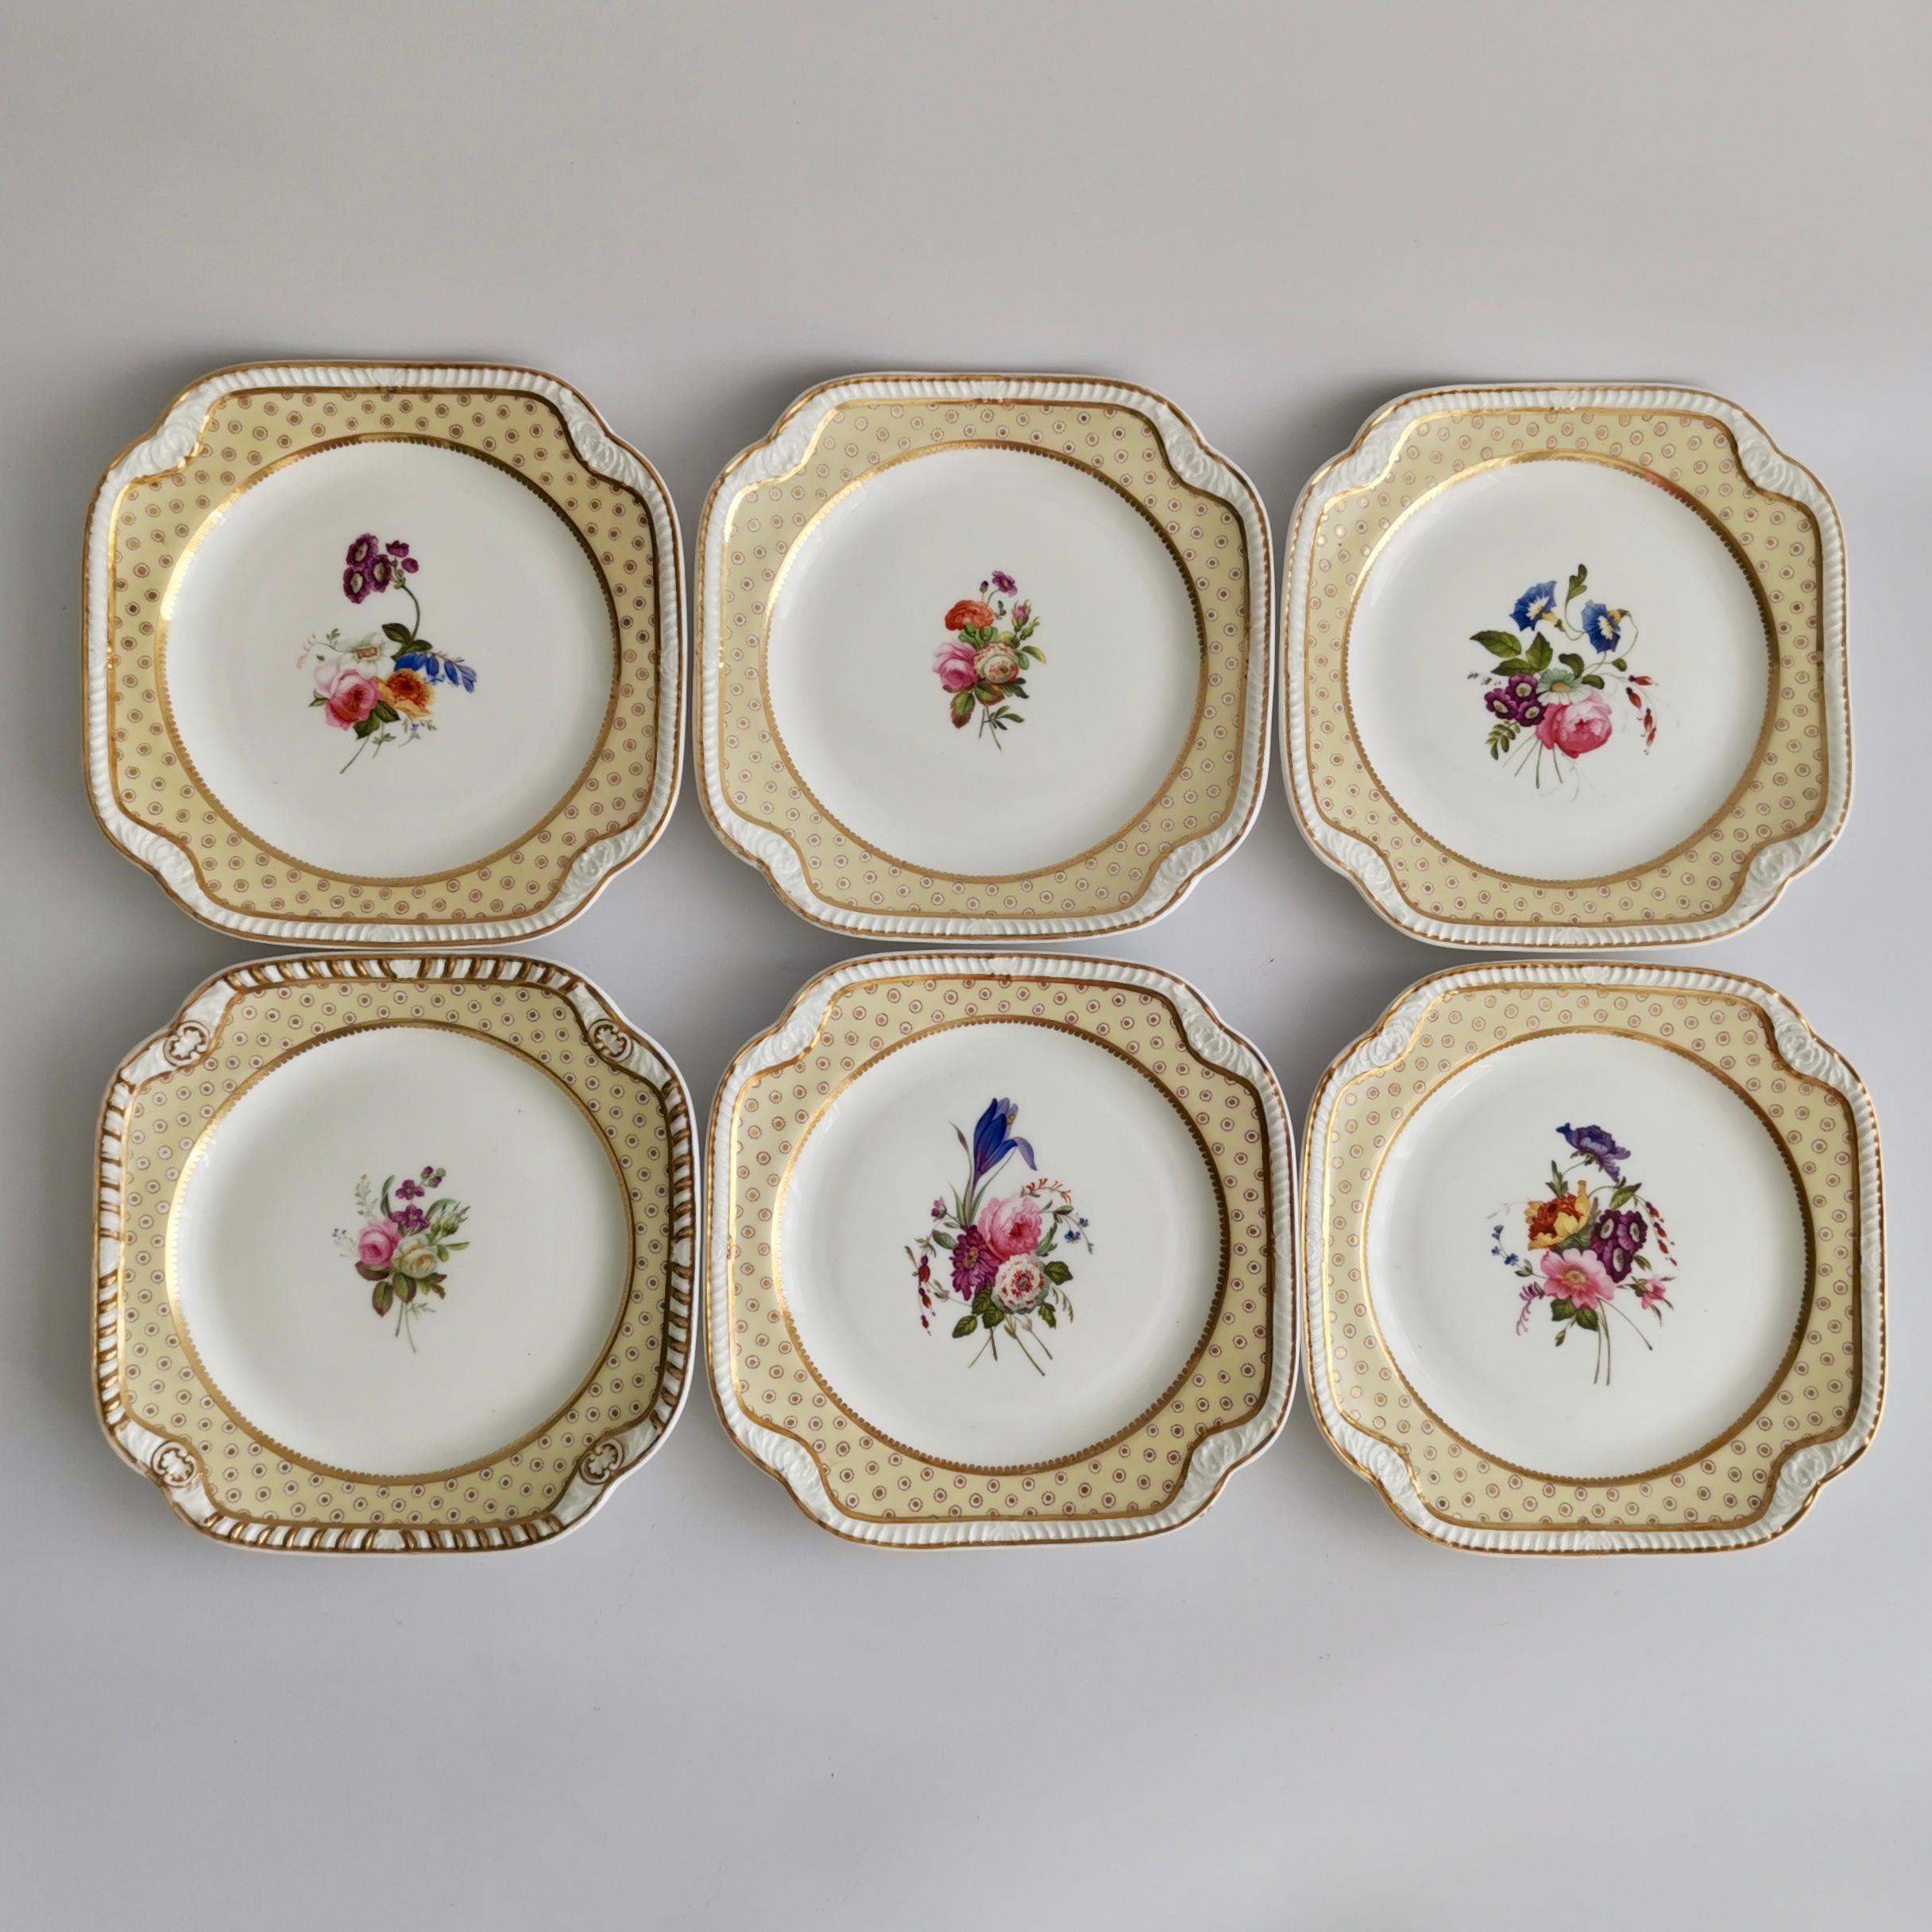 Spode Felspar Floral Dessert Service, Yellow, Butterfly Handles, circa 1822 In Good Condition For Sale In London, GB